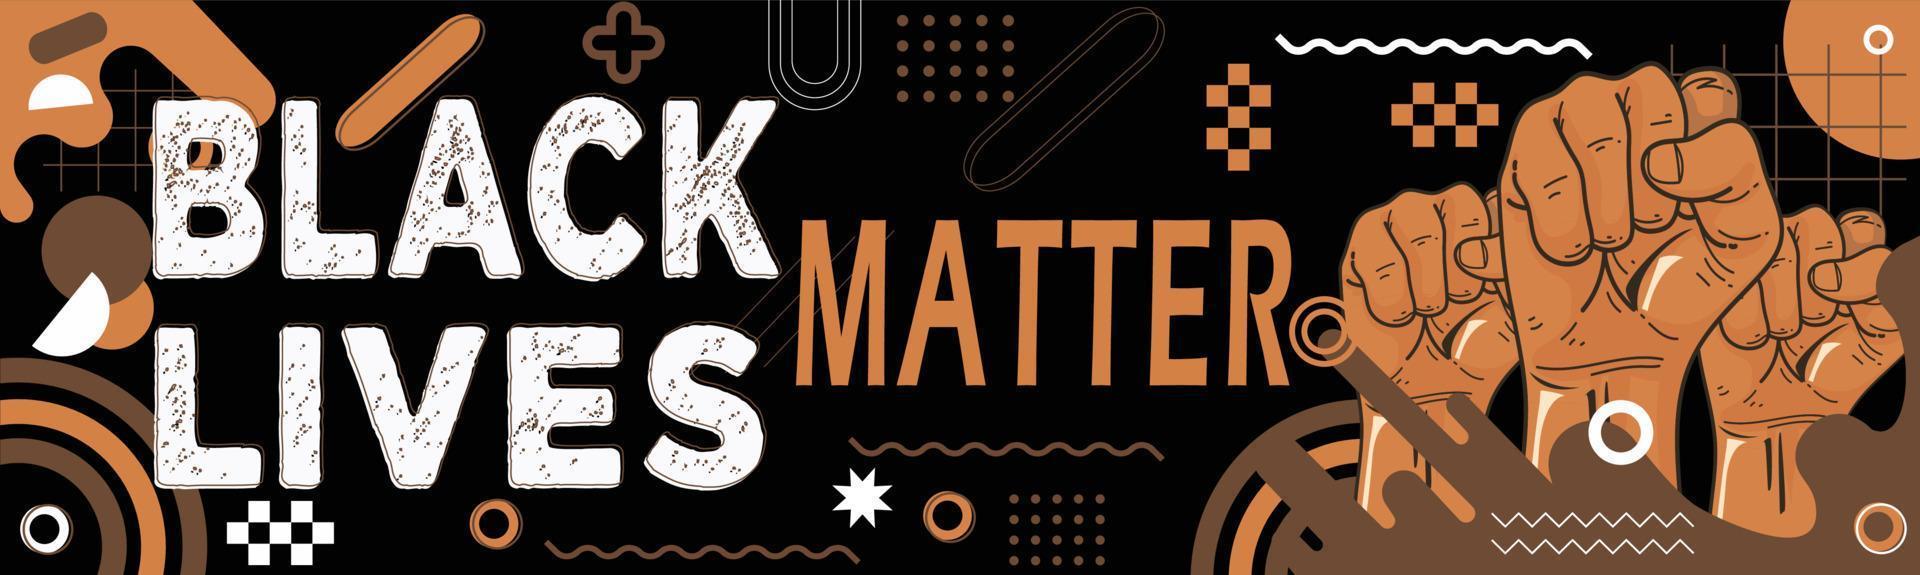 Black lives matter for protest Banner , rally or awareness campaign against racial discrimination on dark skin color. Support for equal rights of black people. Raised fists against Police Brutality vector